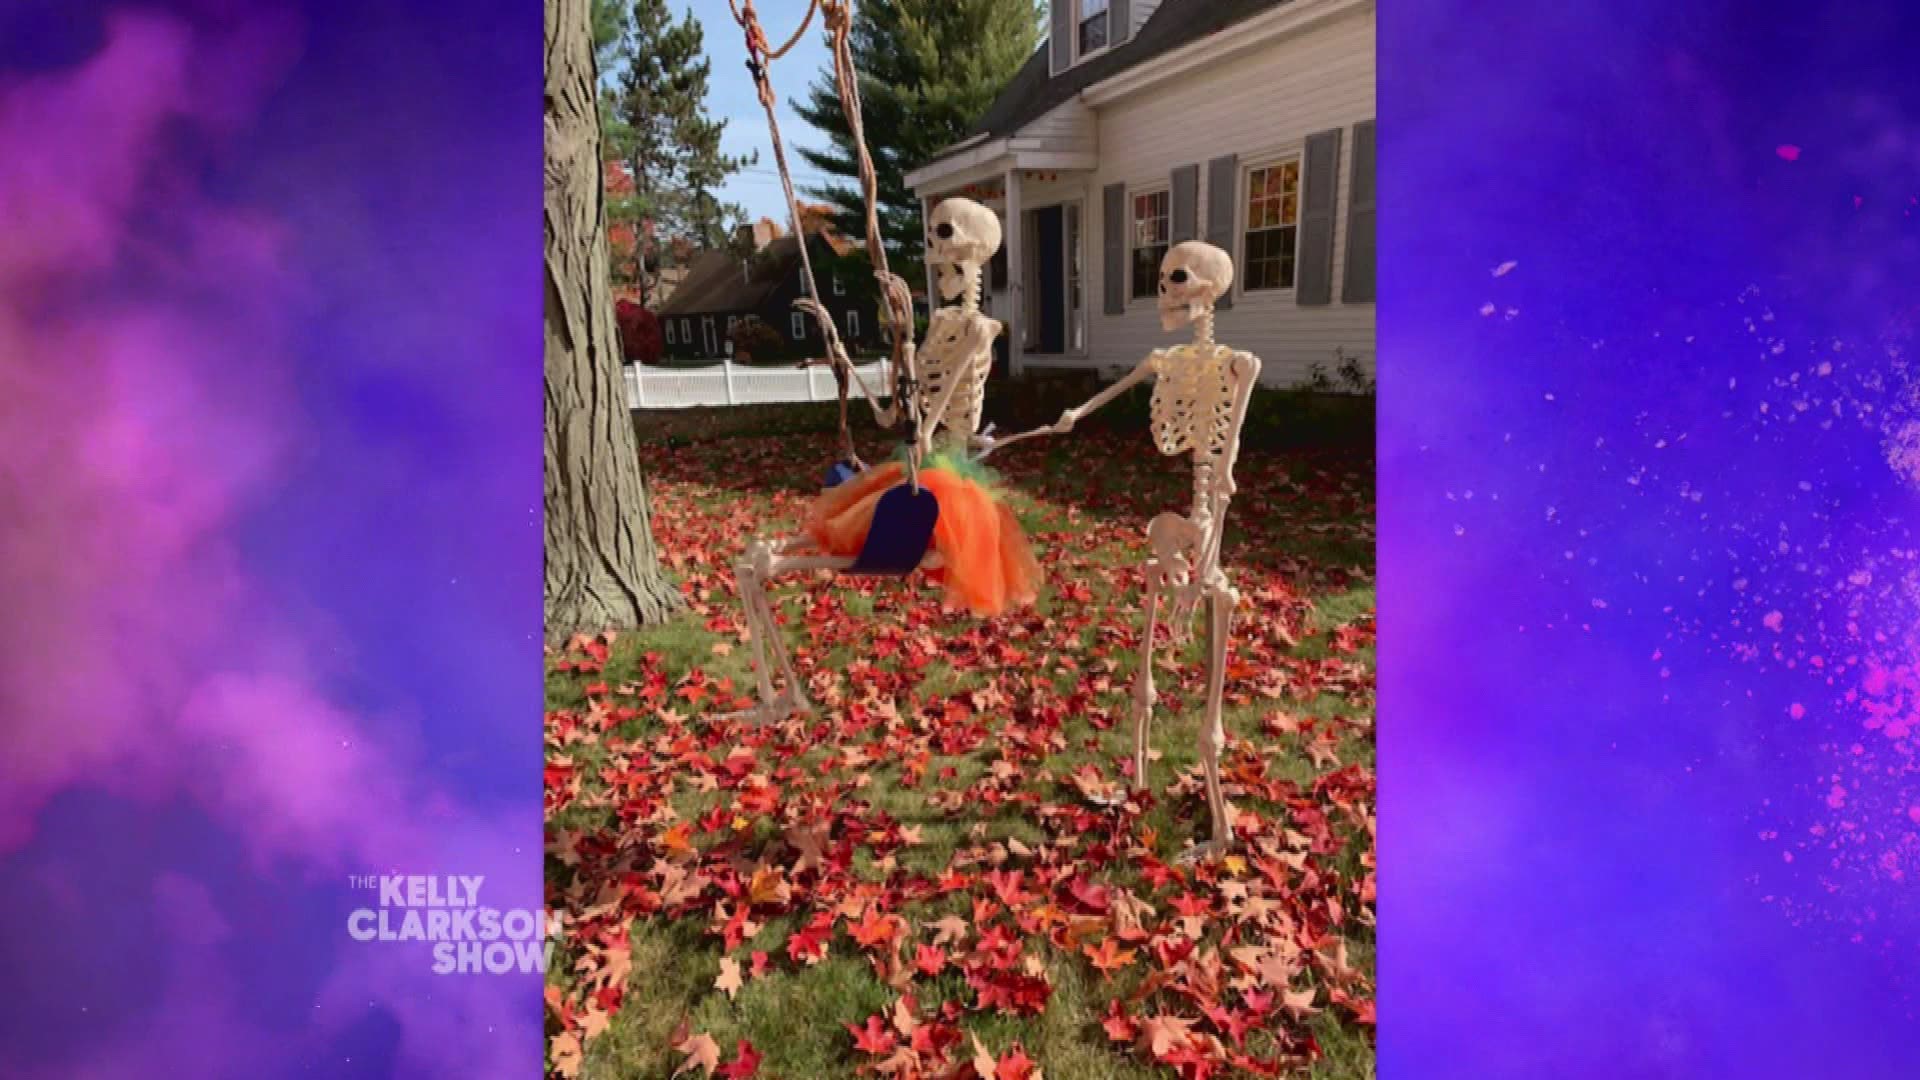 Skully and Bonita make a quest appearance on the Kelly Clarkson show